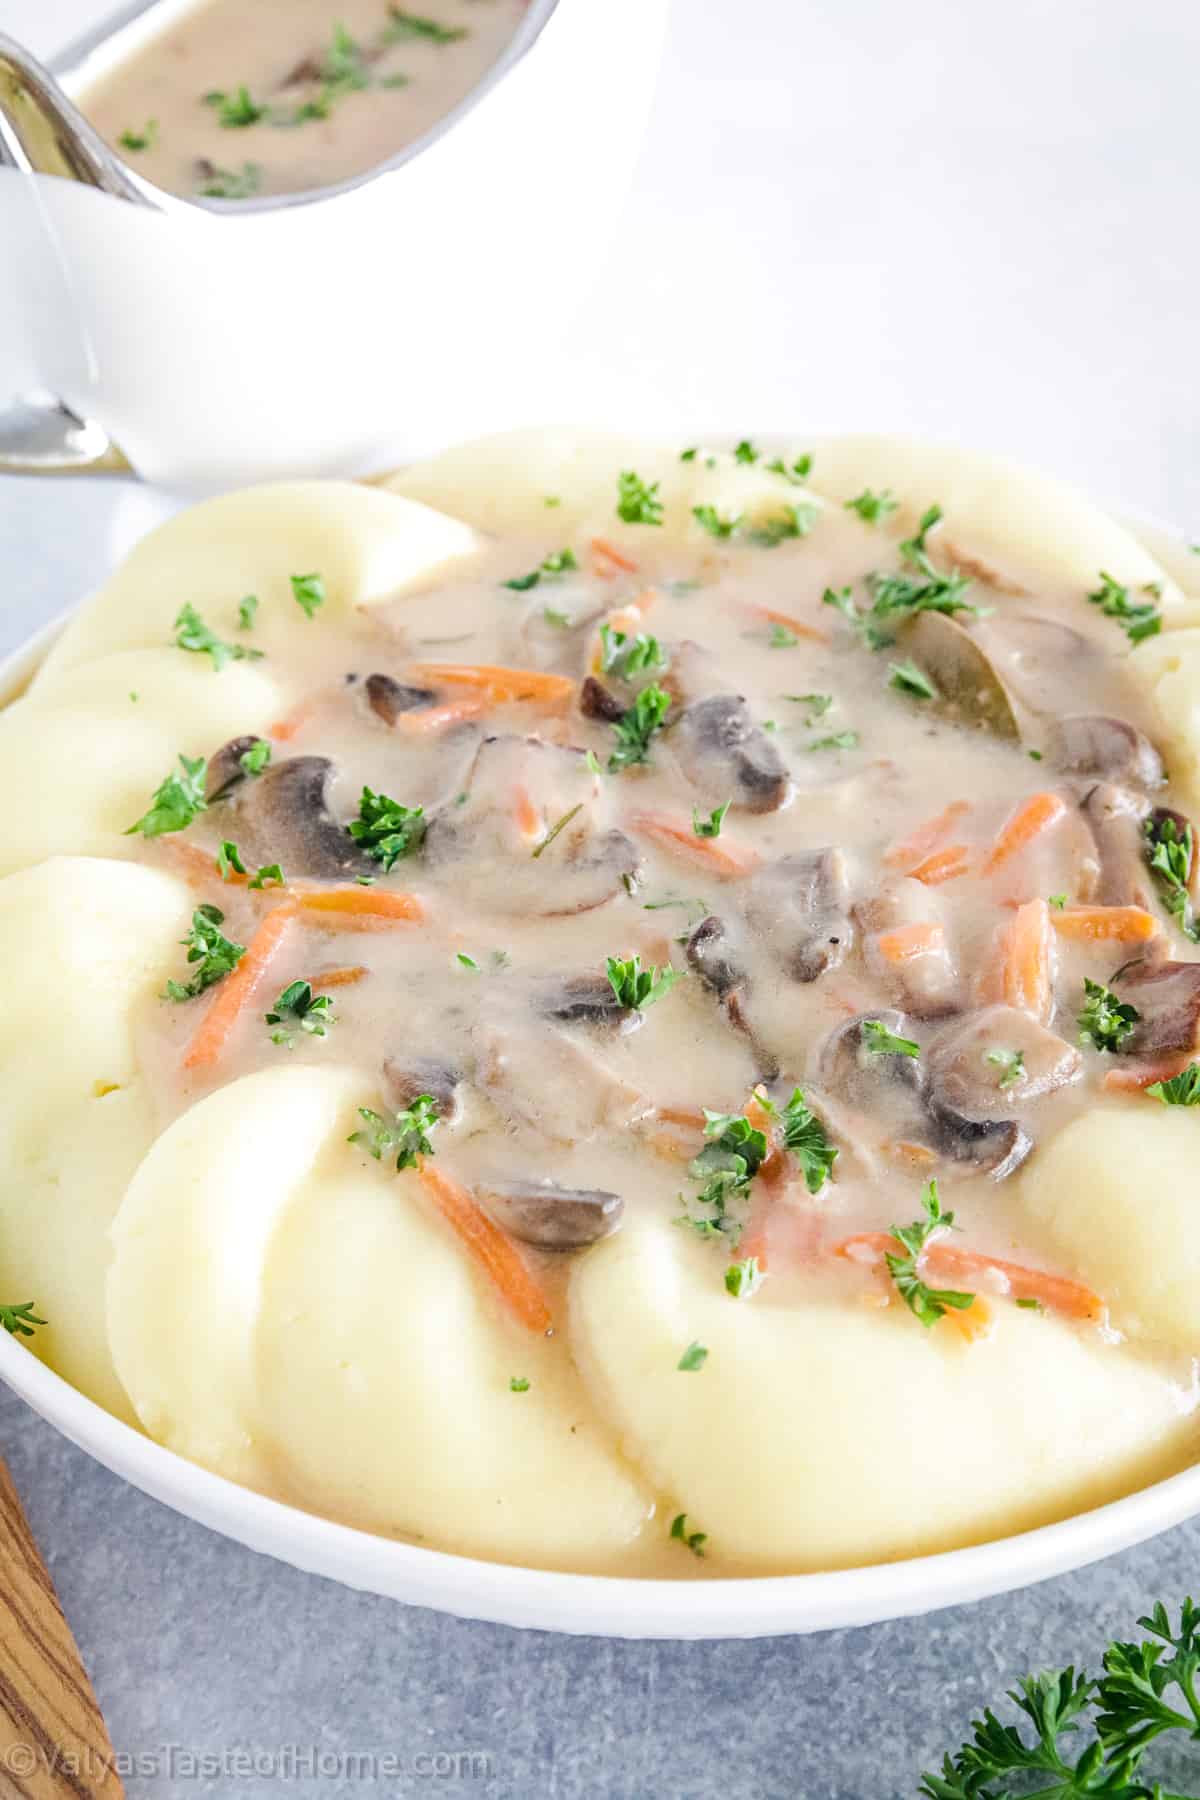 This mushroom gravy recipe can be made in various ways depending on the desired consistency and taste. 